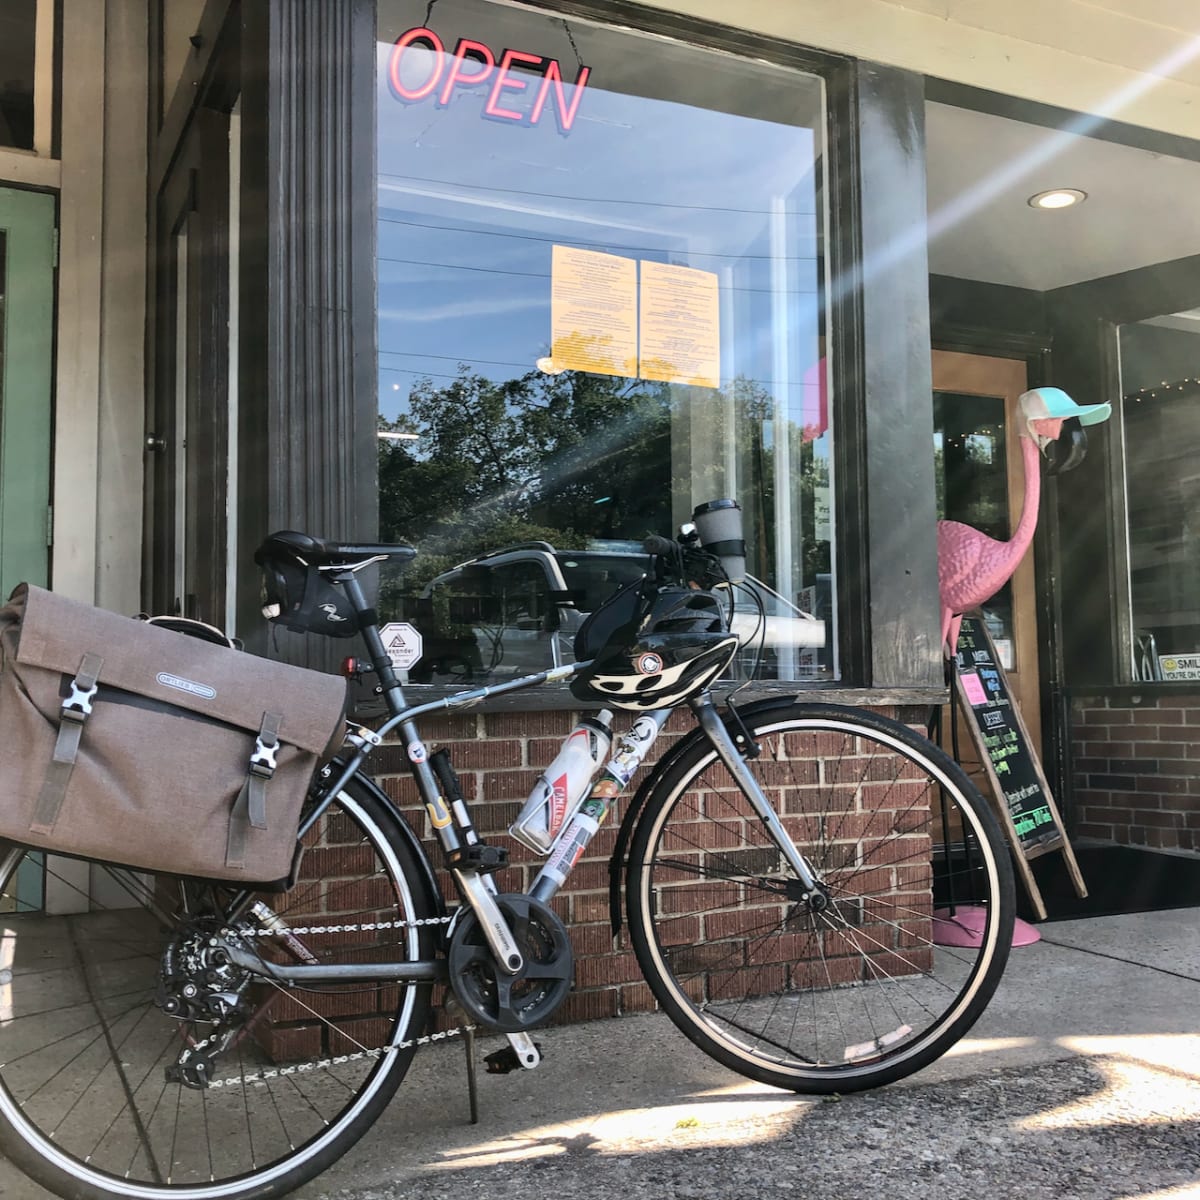 My bicycle in front of a storefront.